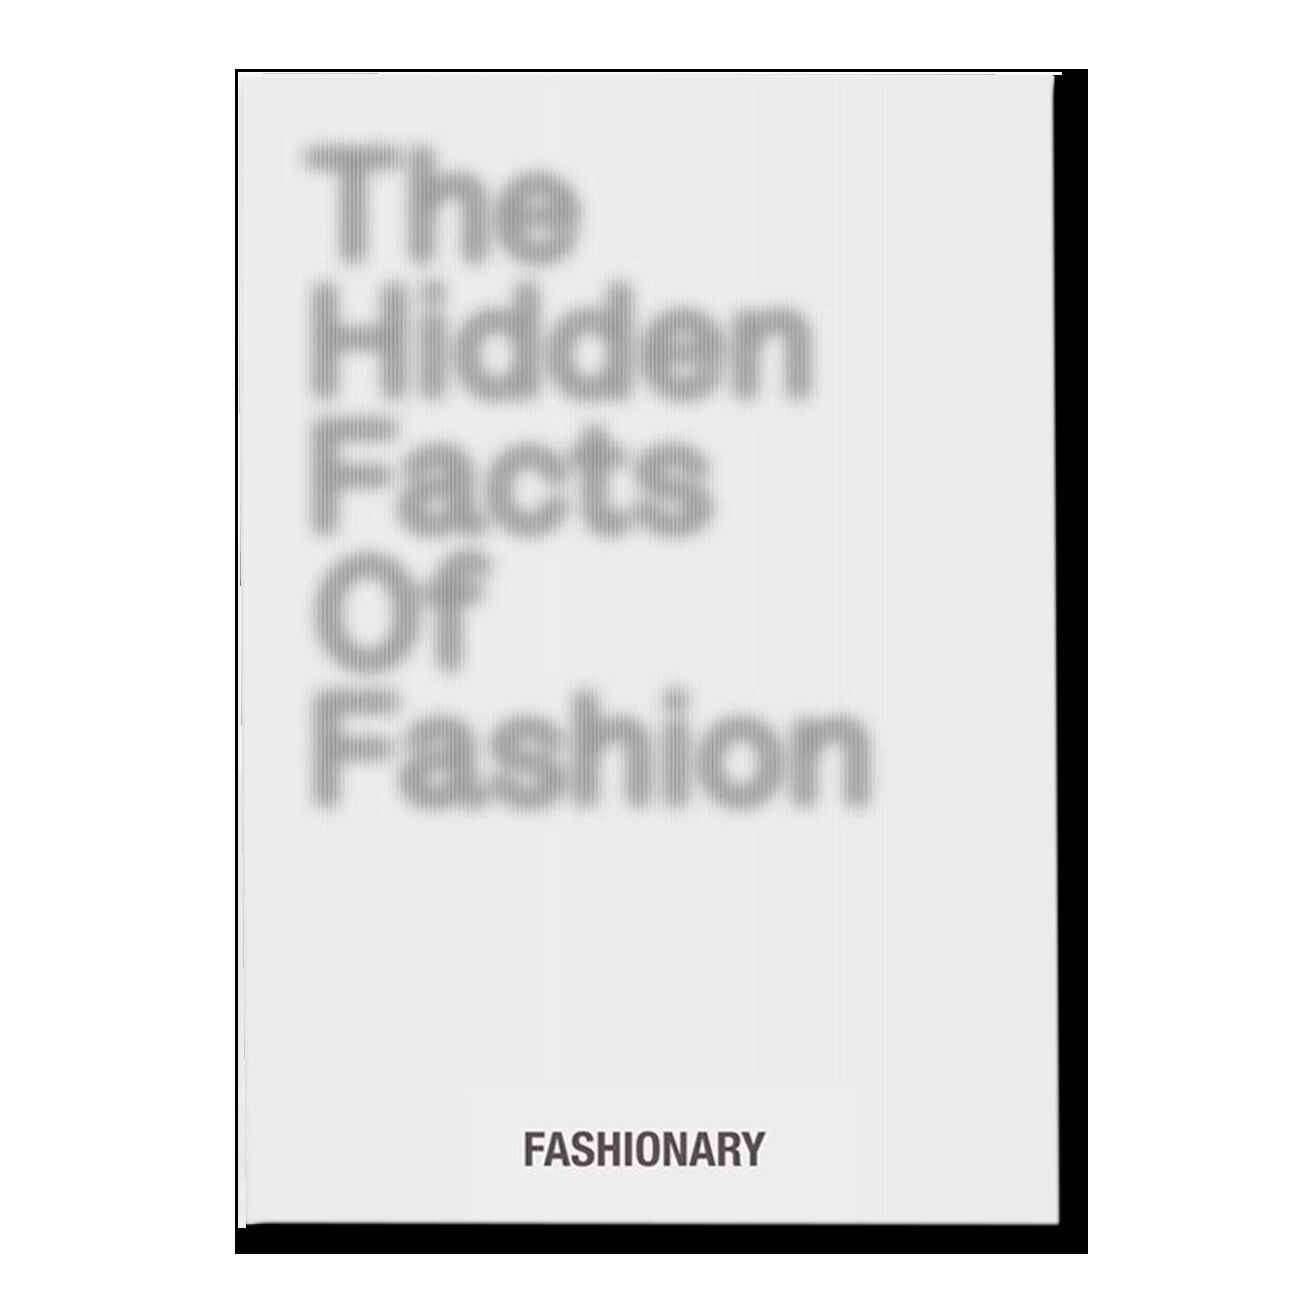 The Hidden Facts of Fashion